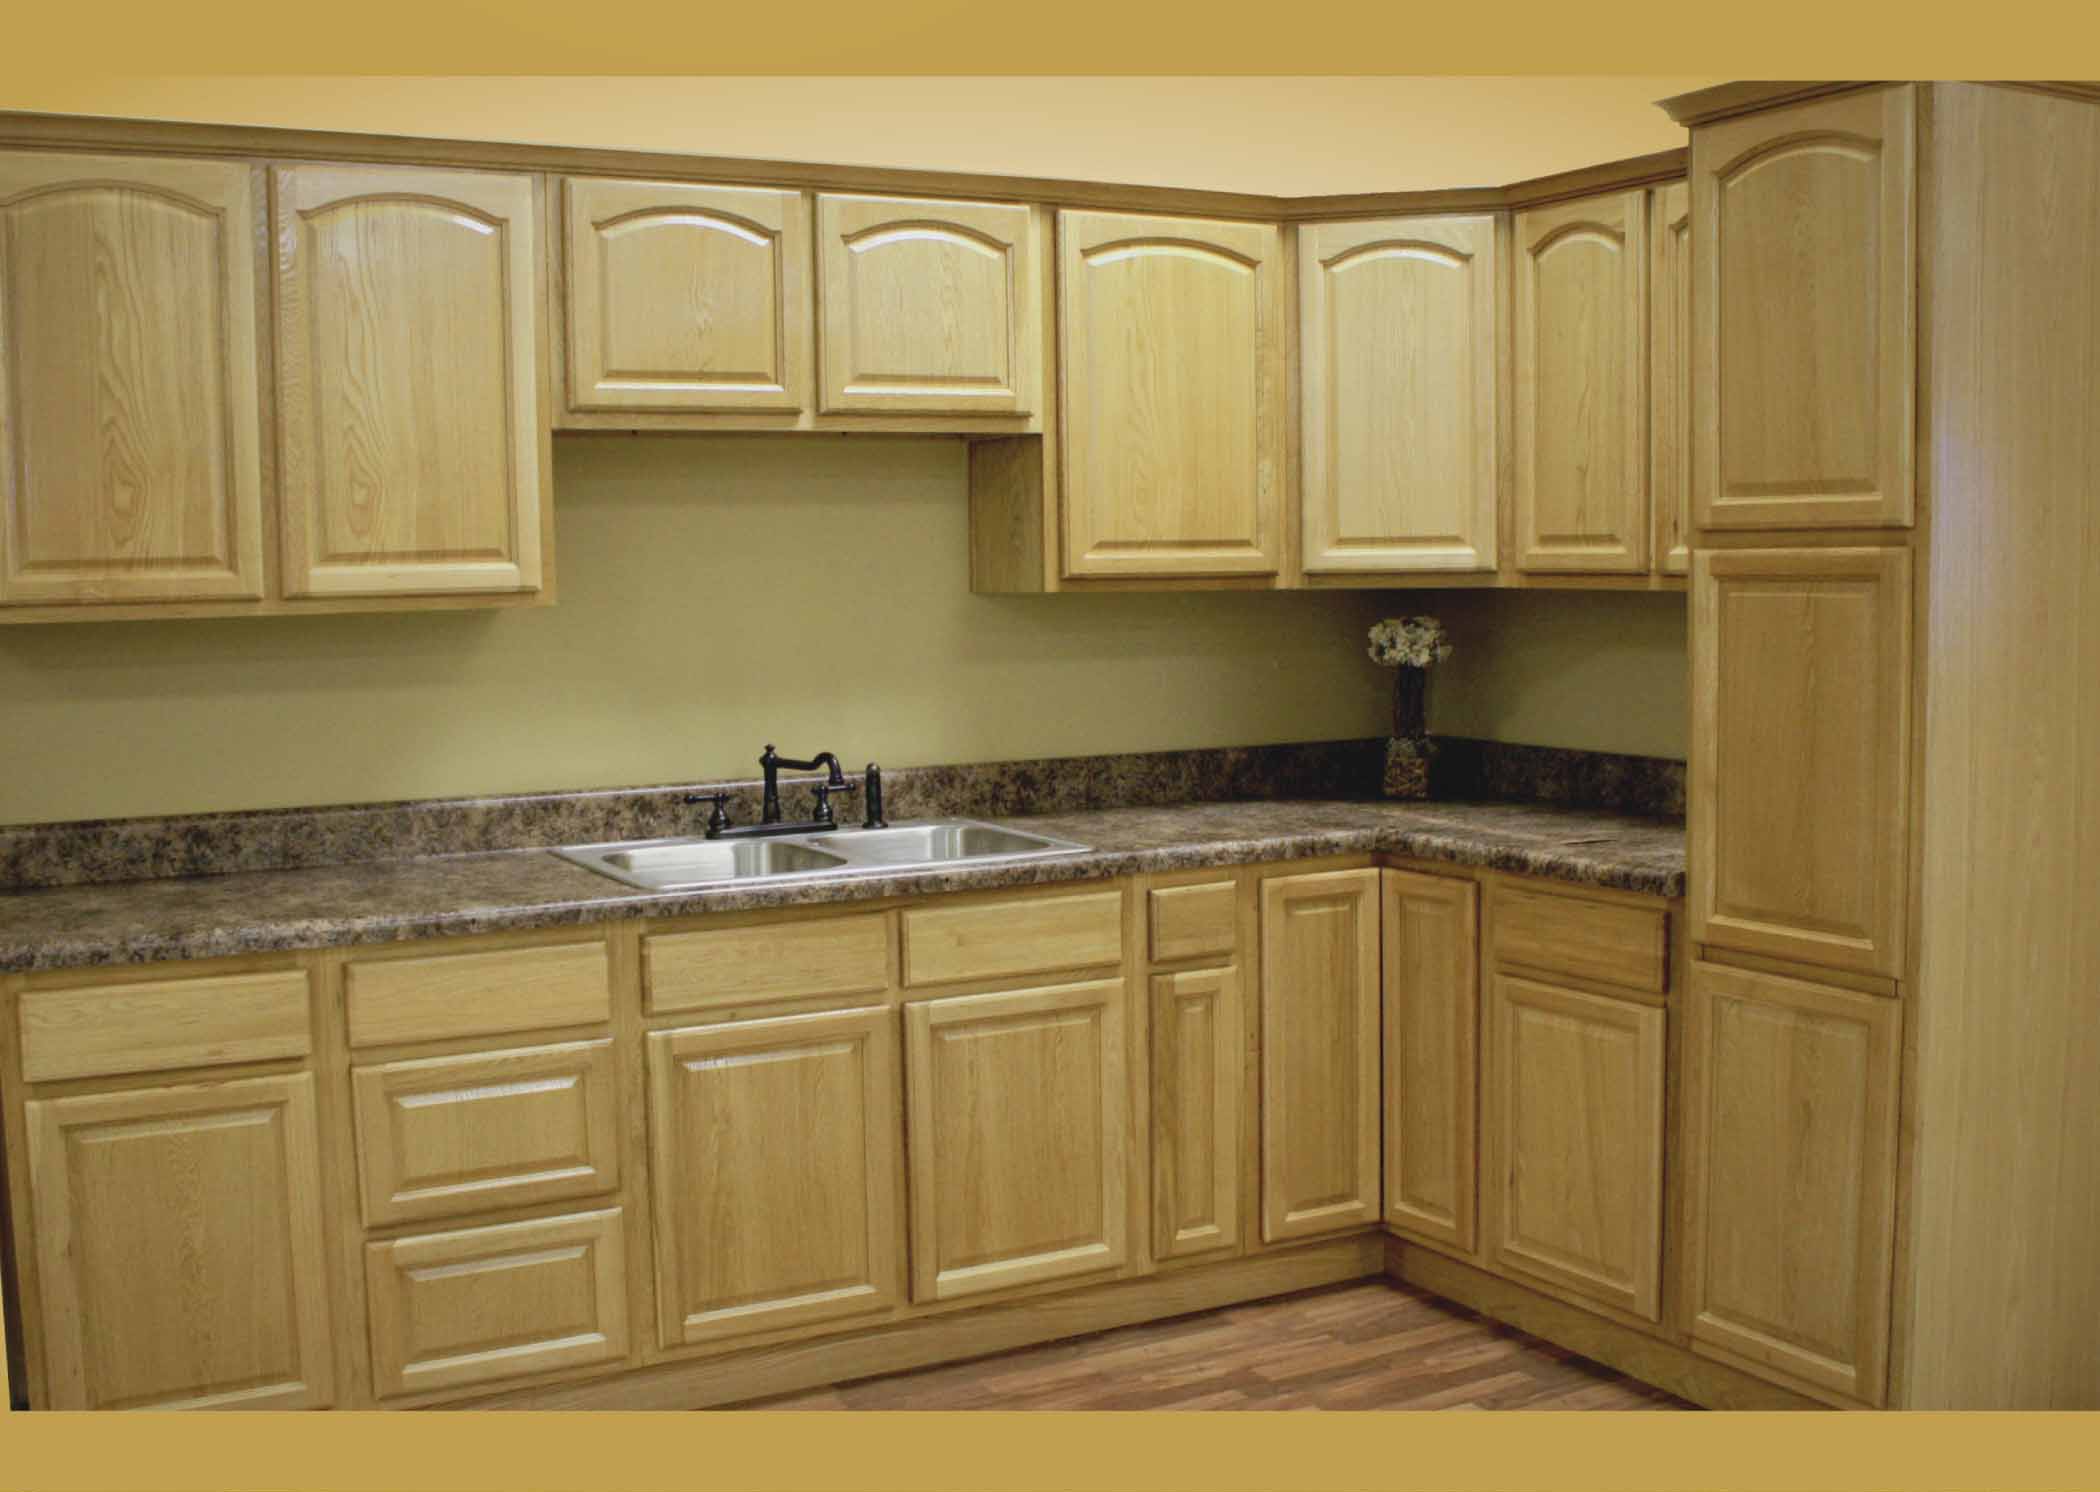 In Stock Cabinets — New Home Improvement Products at ...